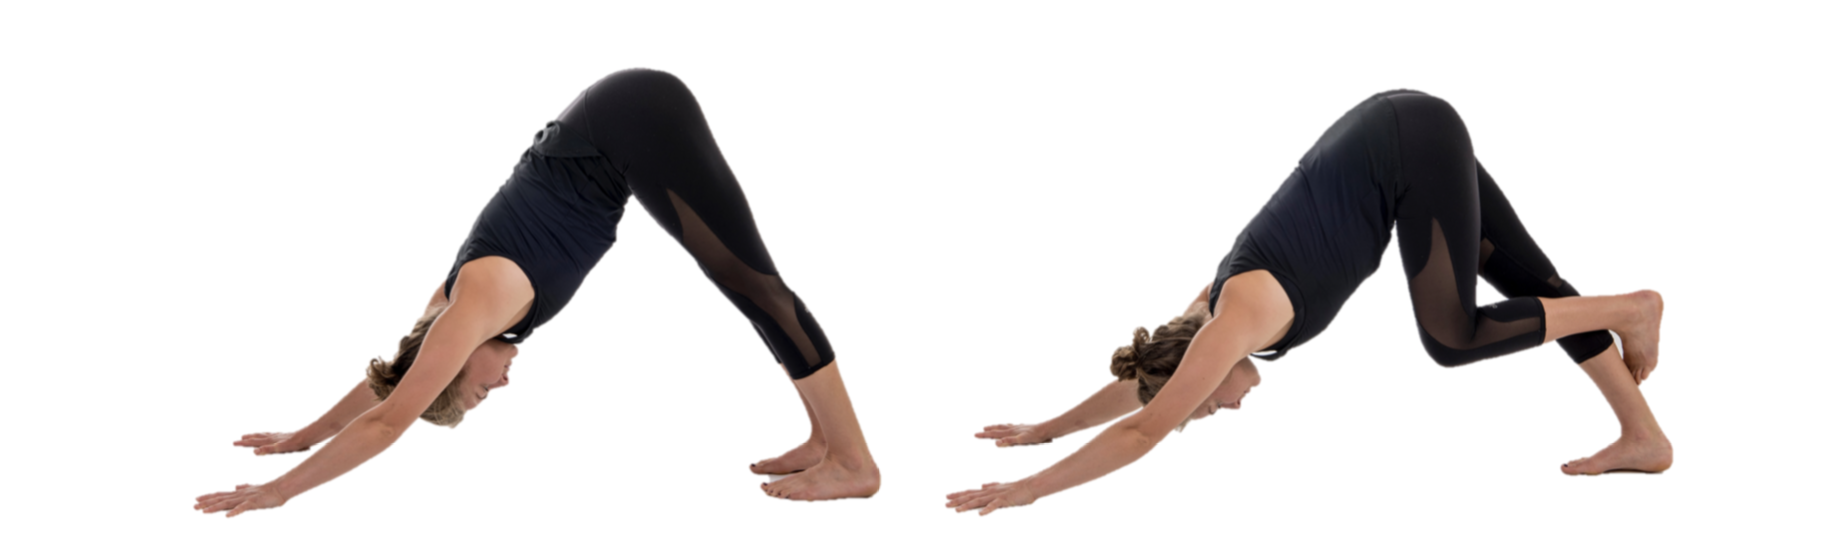 Stretch, rowing stretch, Downward Dog and variant with hooked foot